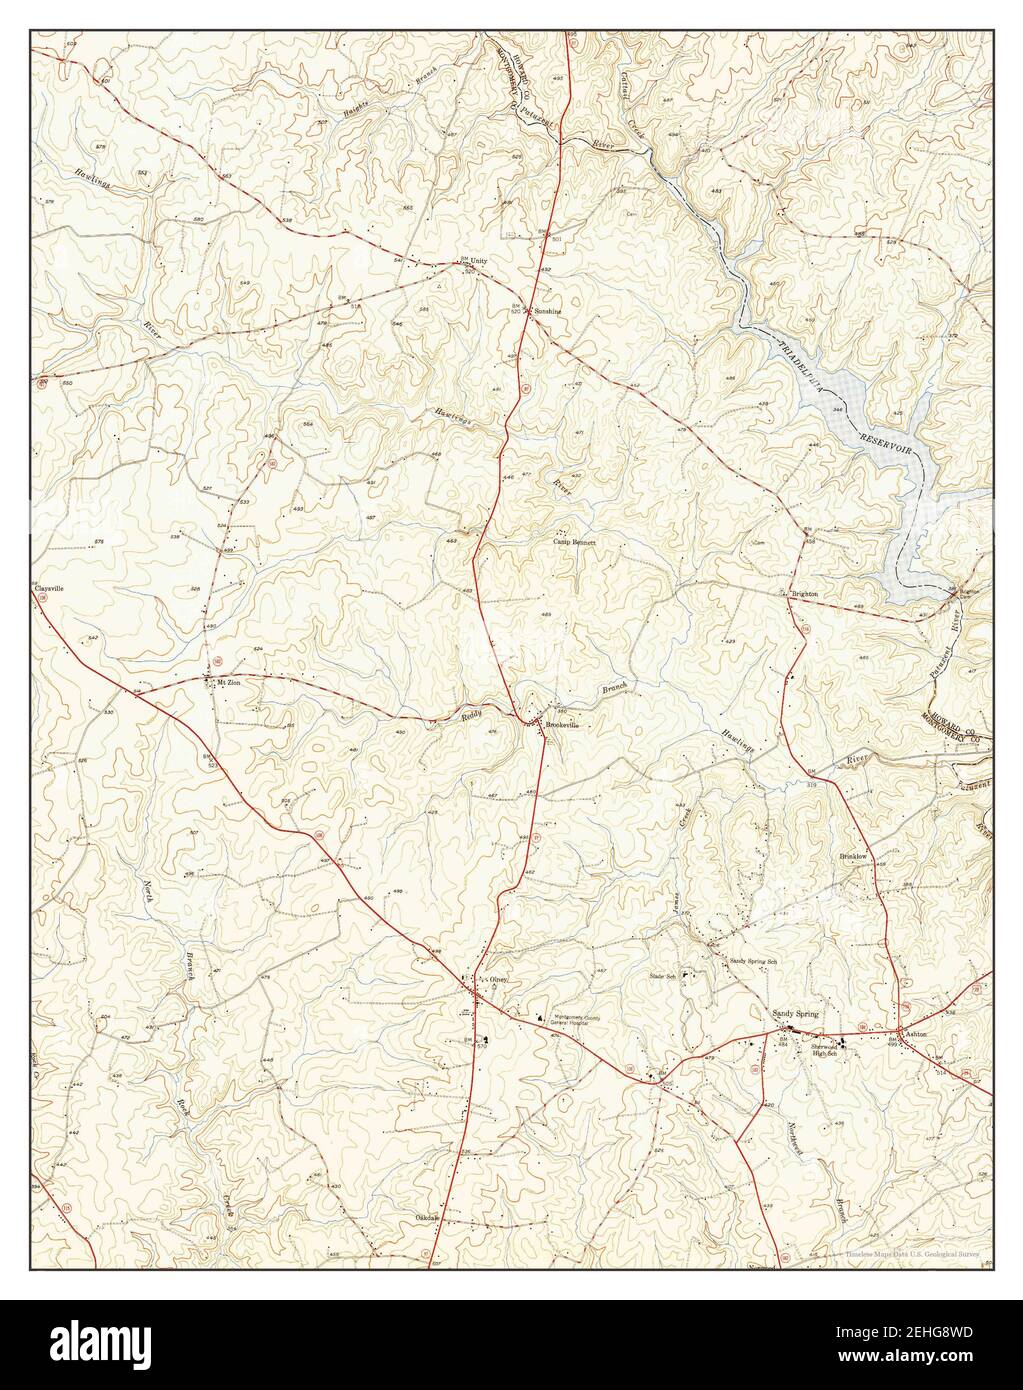 Sandy Spring, Maryland, map 1950, 1:24000, United States of America by Timeless Maps, data U.S. Geological Survey Stock Photo